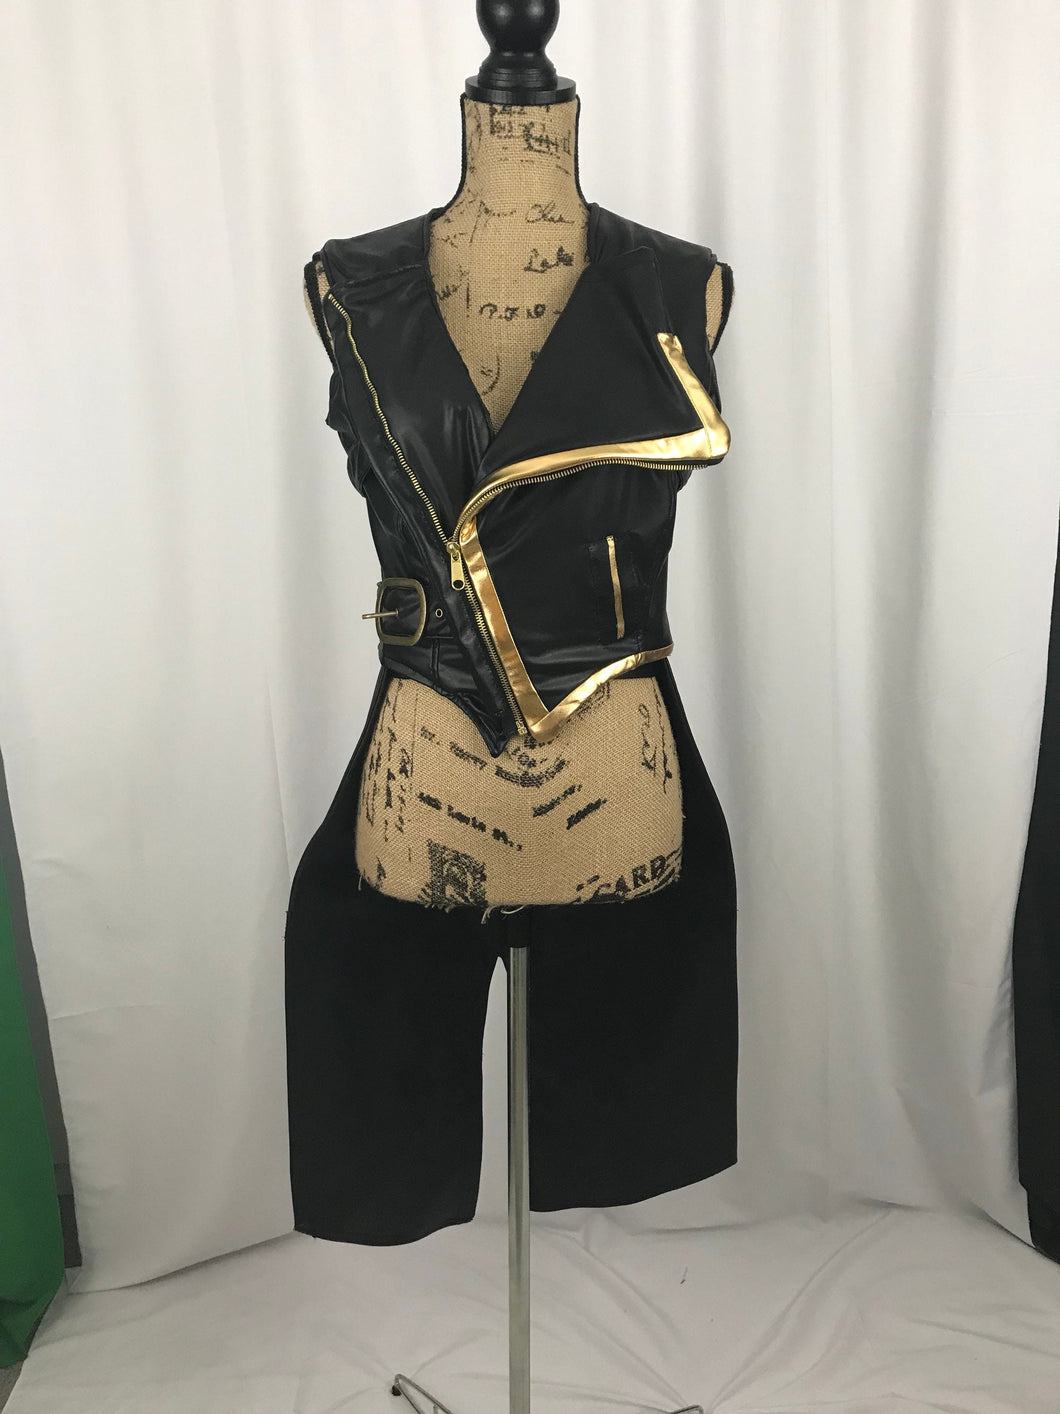 Adult Black and Gold Motorcycle Jacket Coat Cosplay Costume